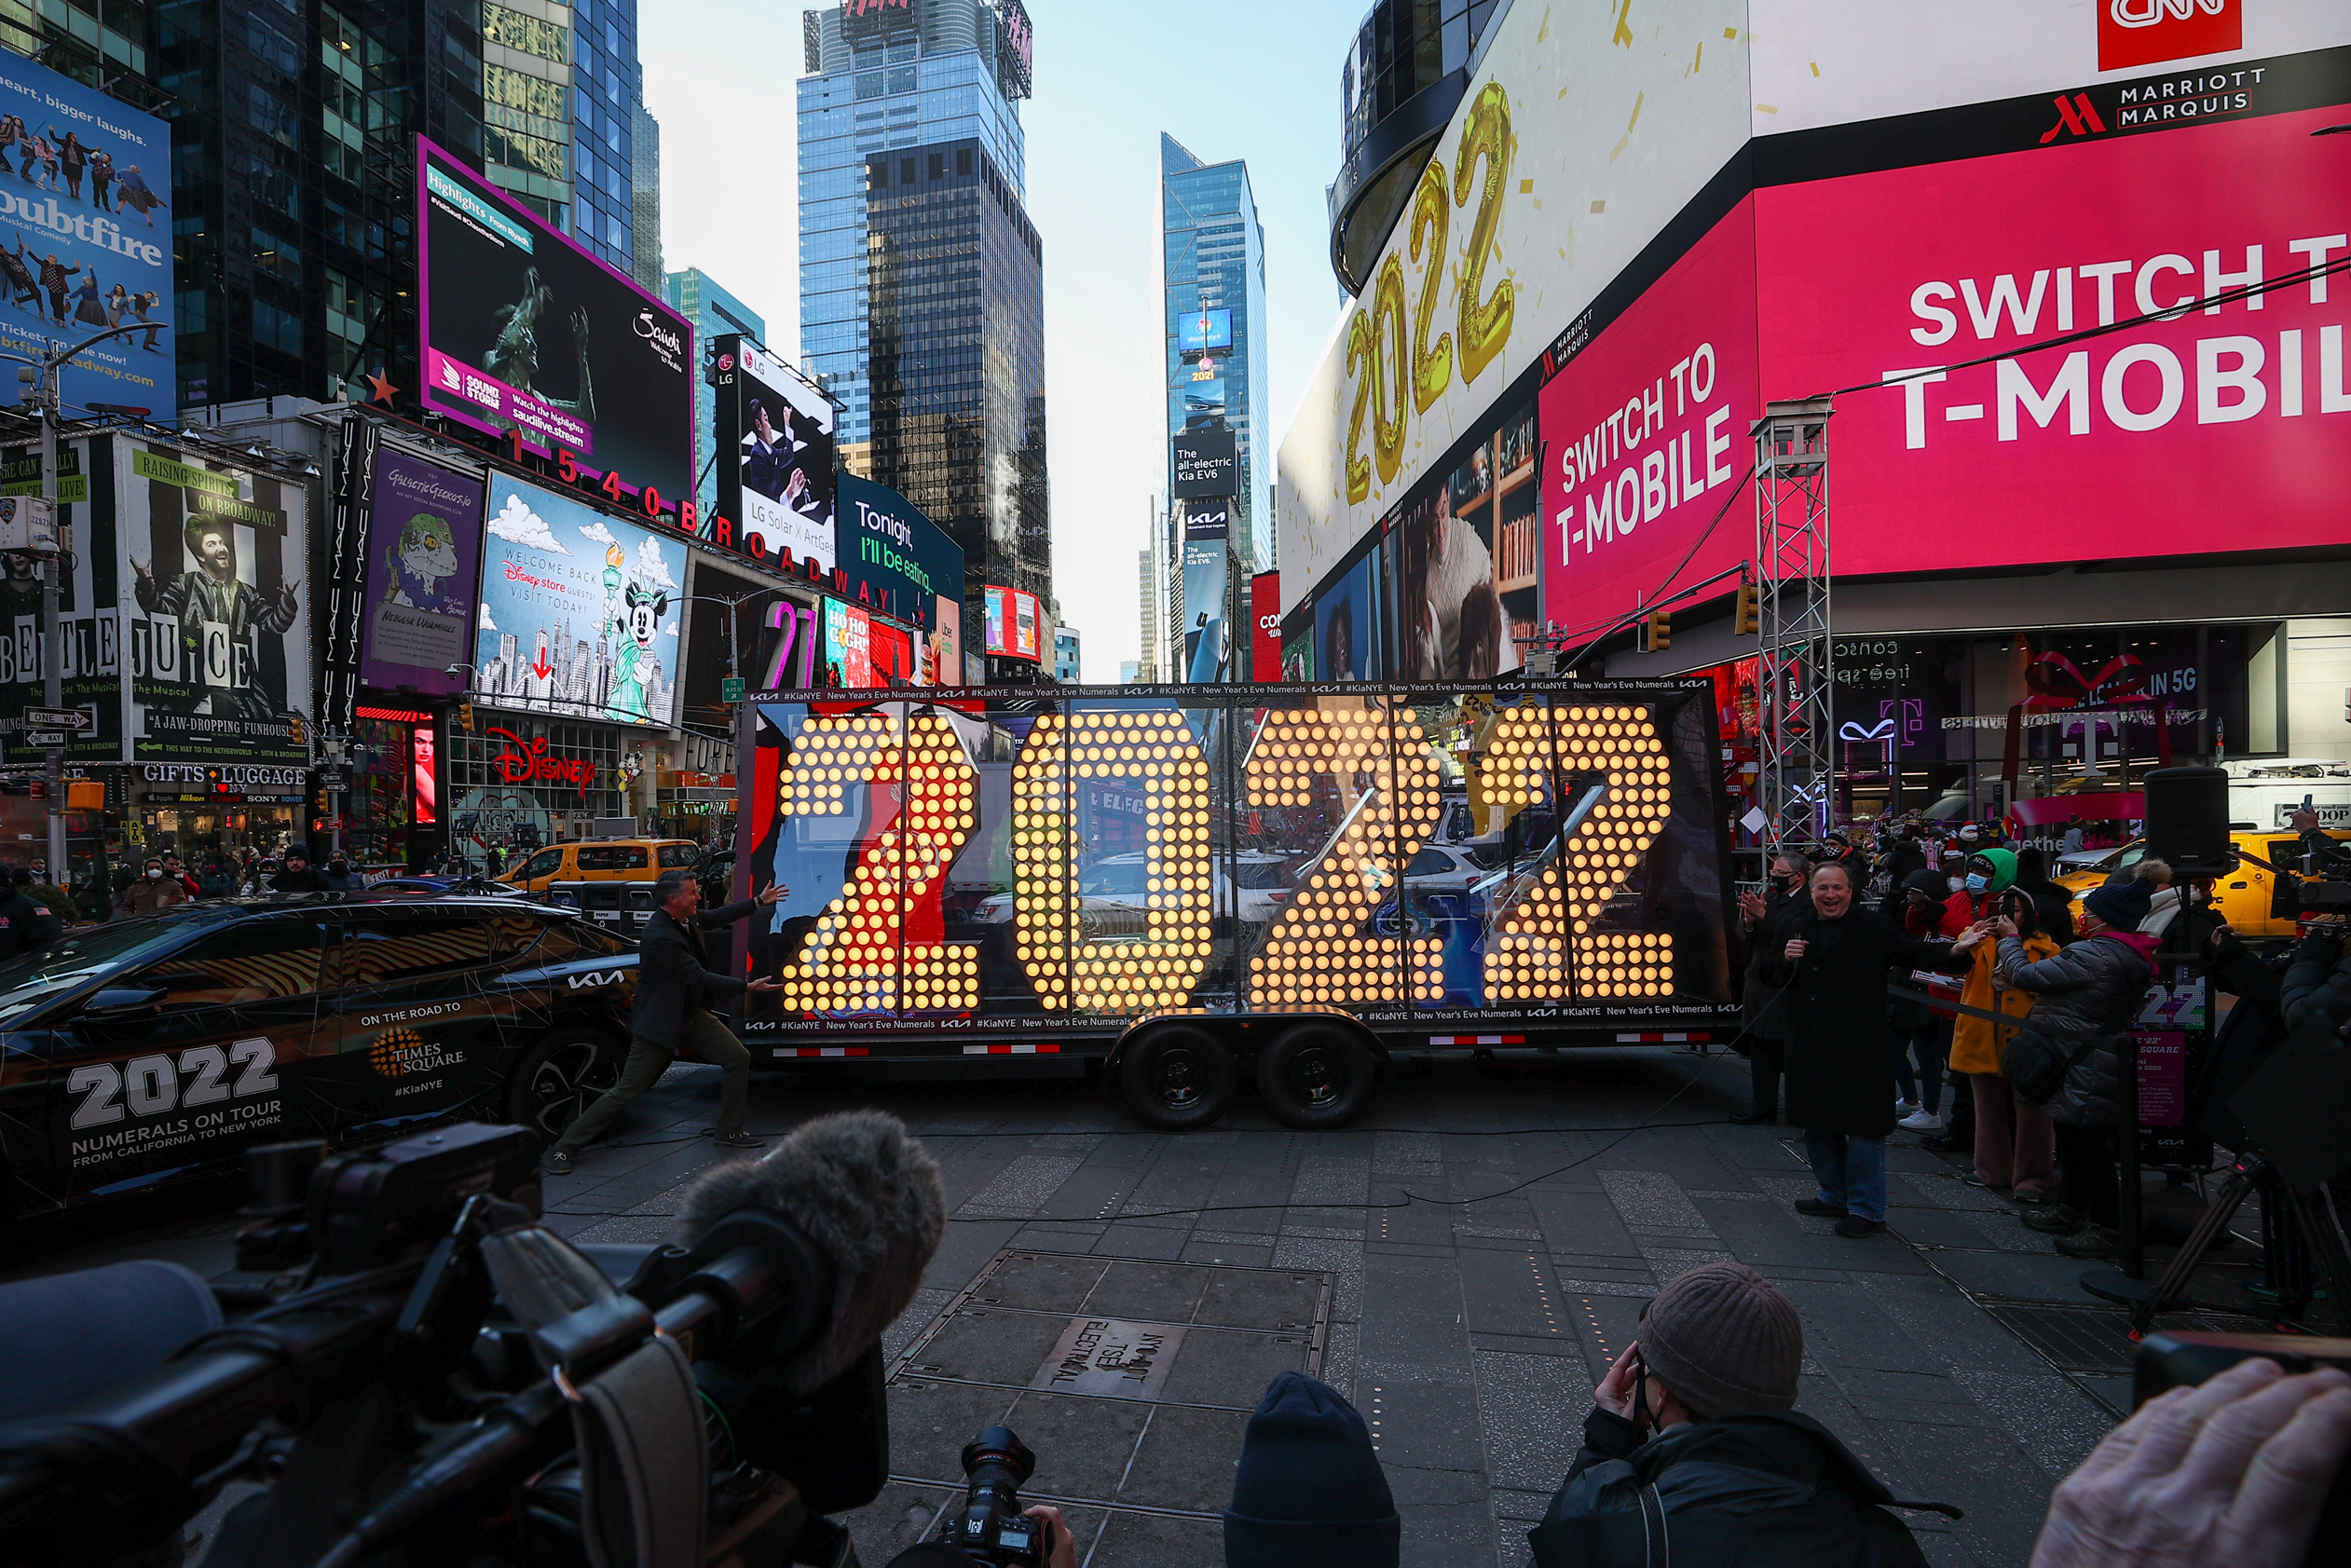 The 2022 New Year's Eve Numeral arrives in Times Square, on Monday, December 20.